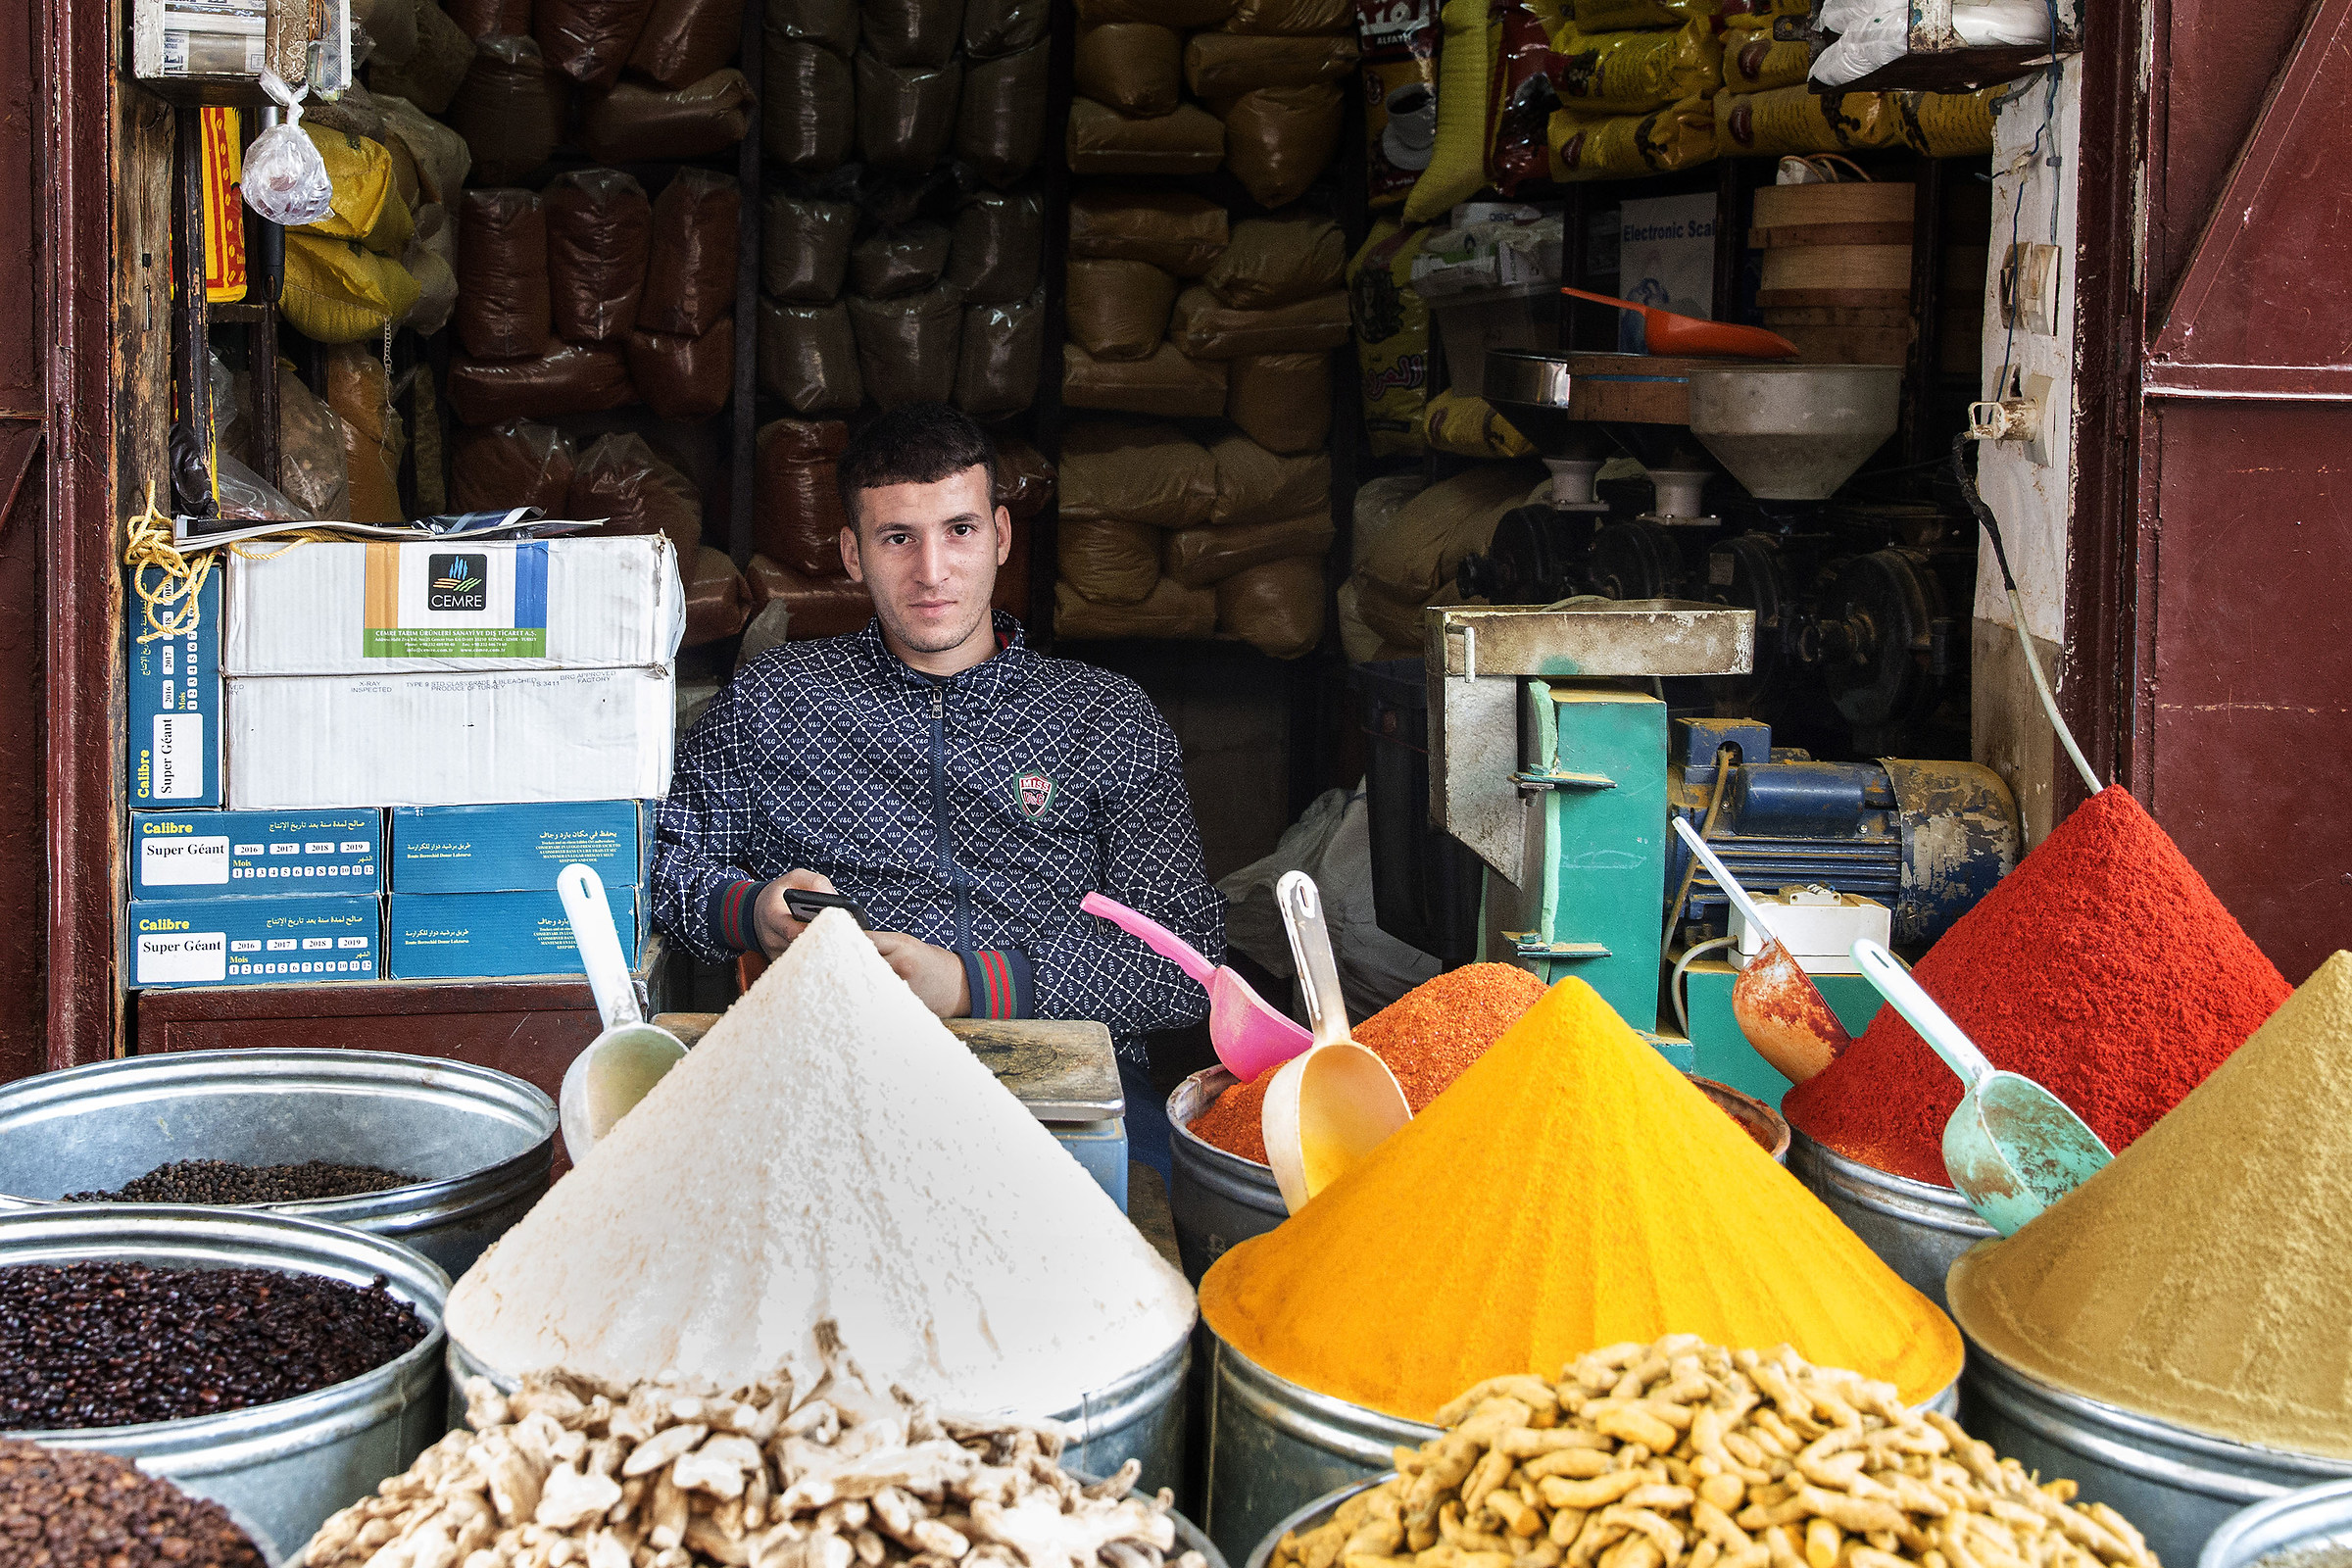 Portraits in Medina - The spice seller...